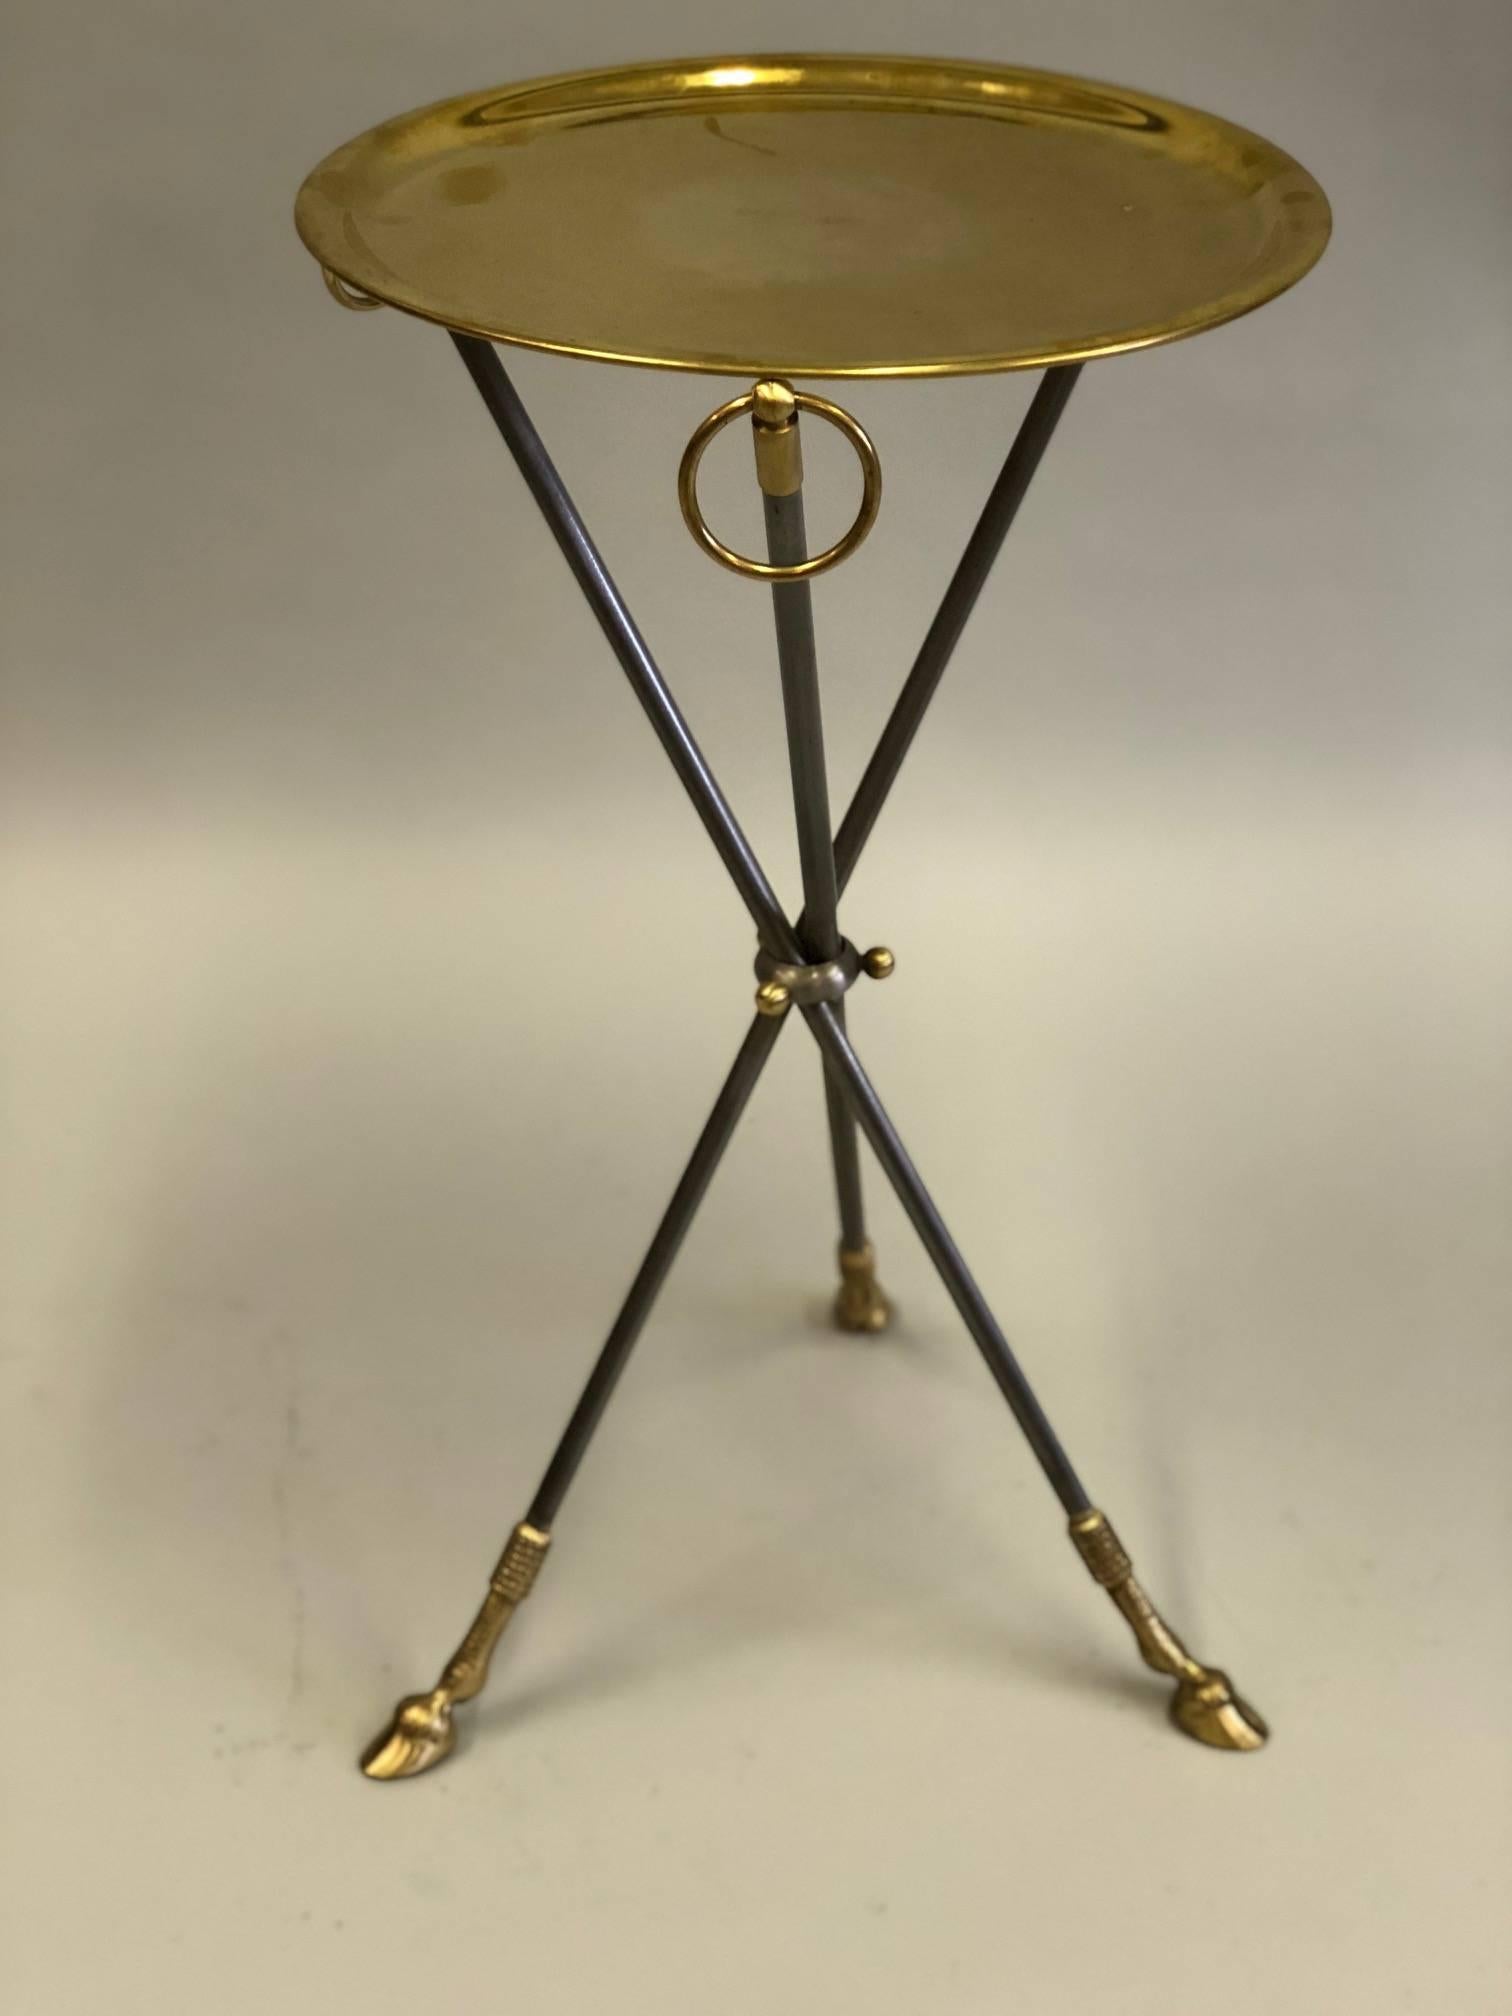 20th Century Pair of French Mid-Century Modern Steel and Brass Side Tables by Maison Baguès